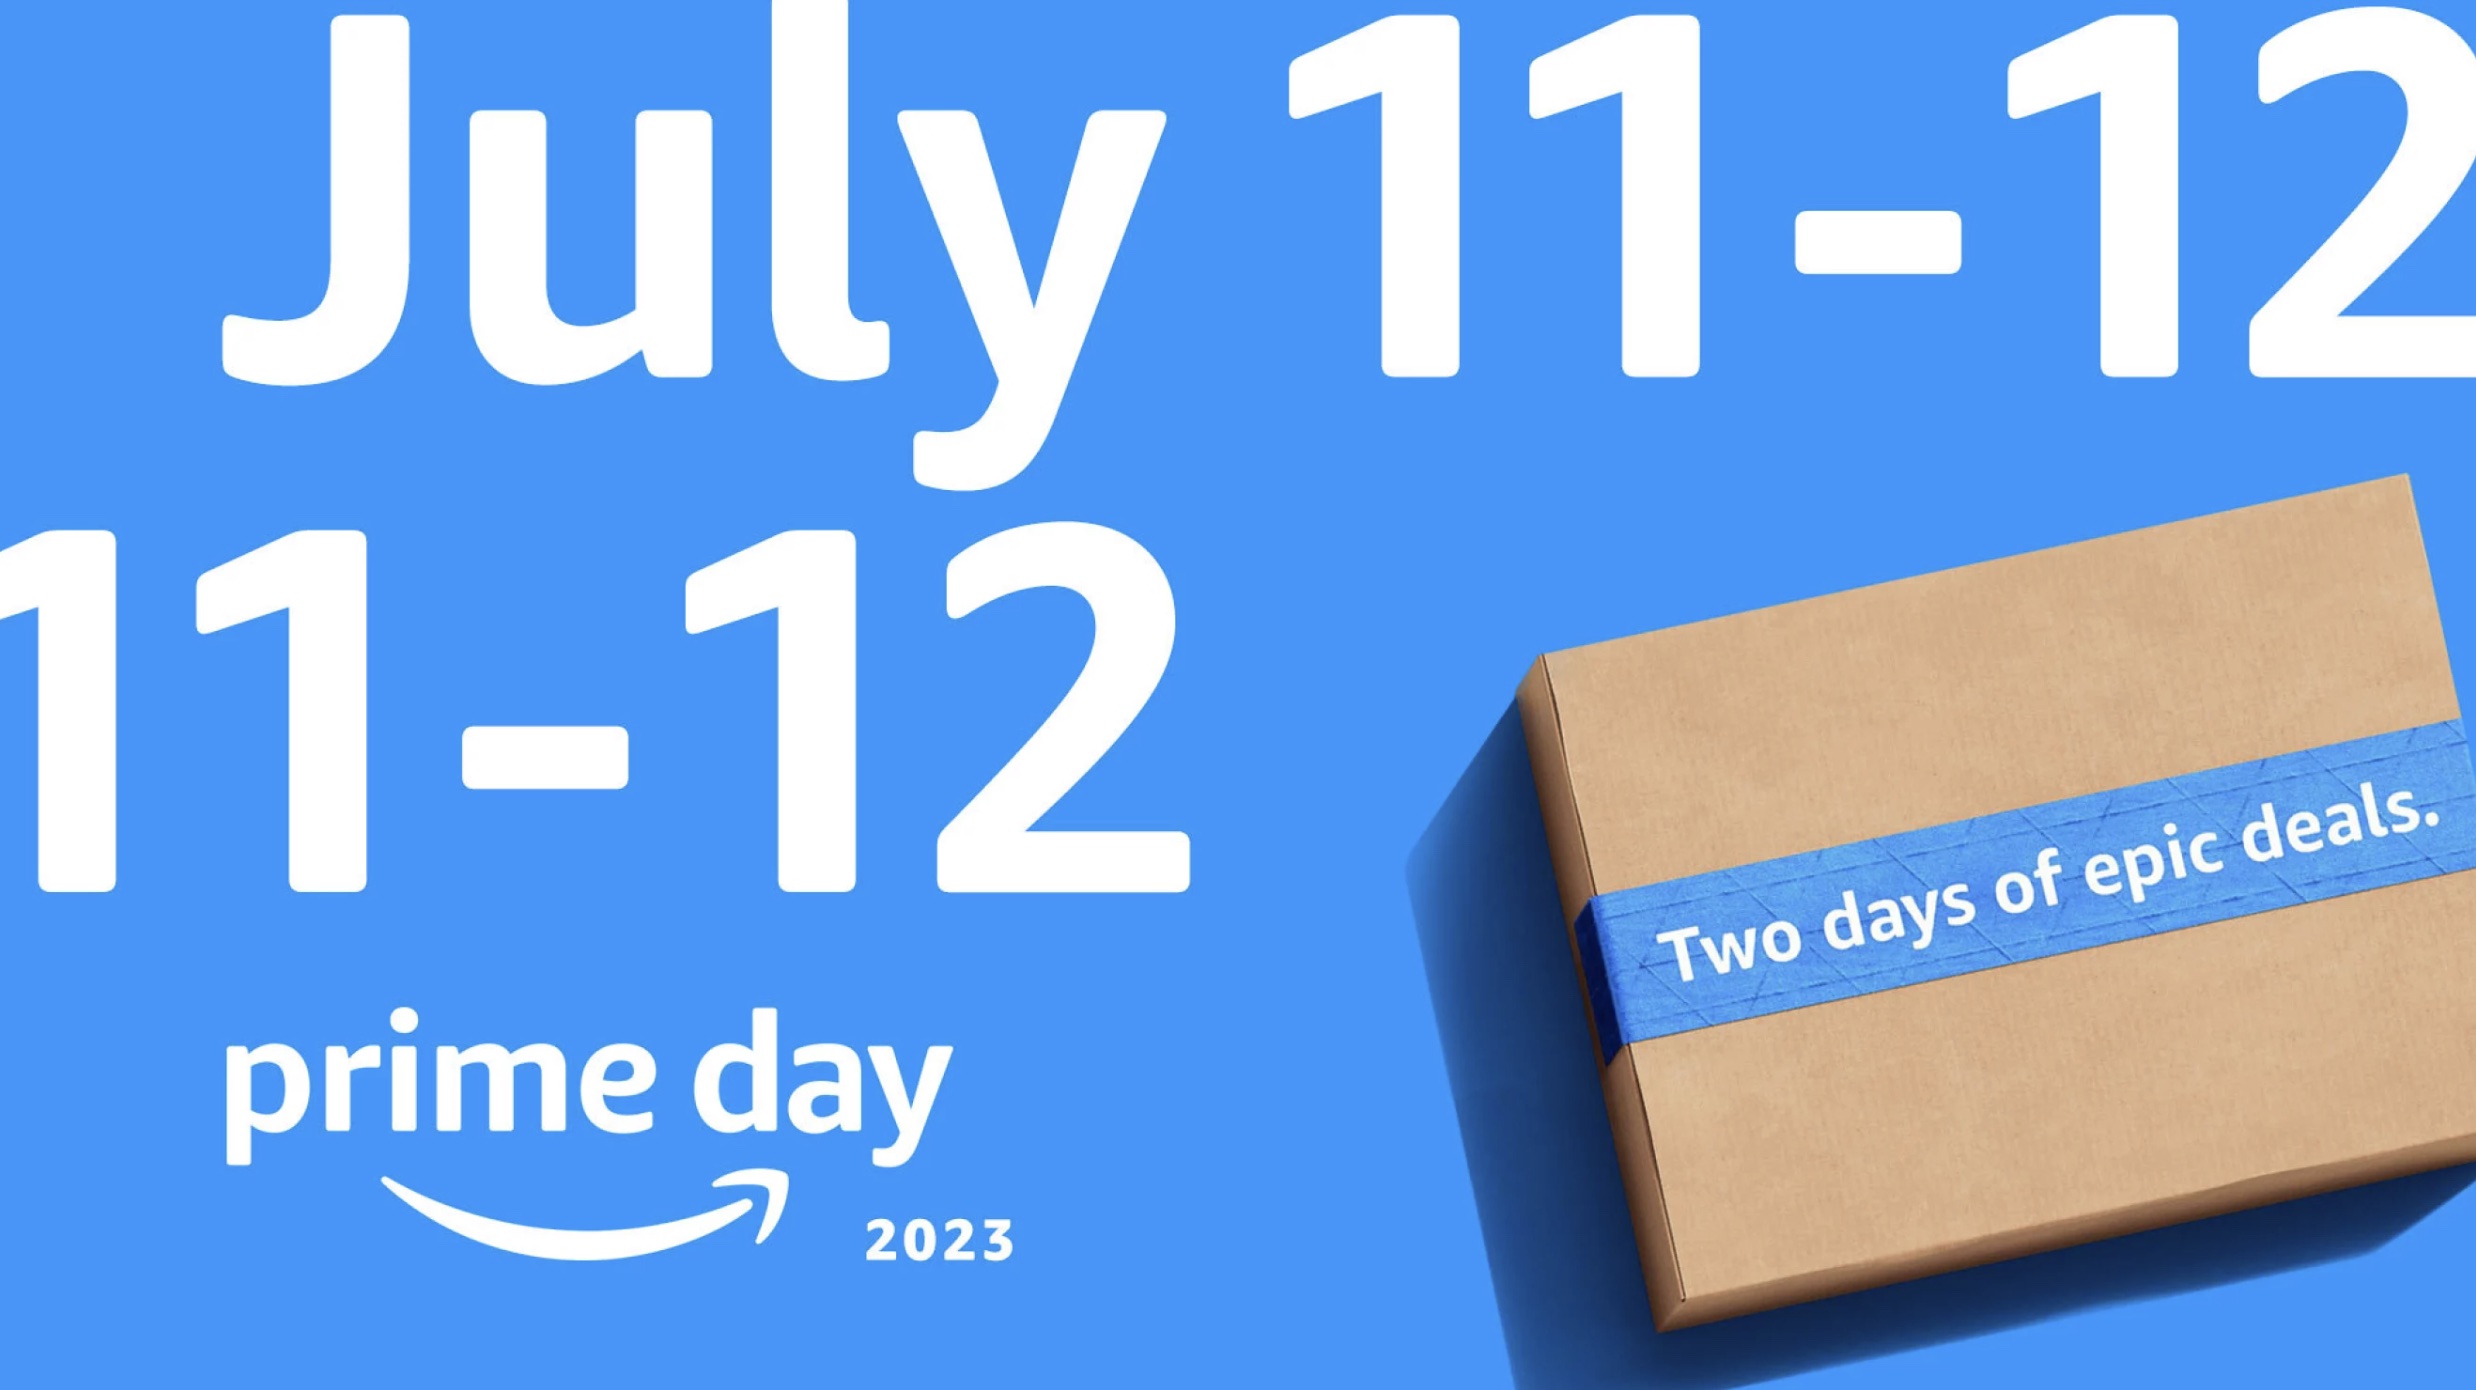 Amazon Prime Day 2023 Will Run July 1112 All About The Tech world!